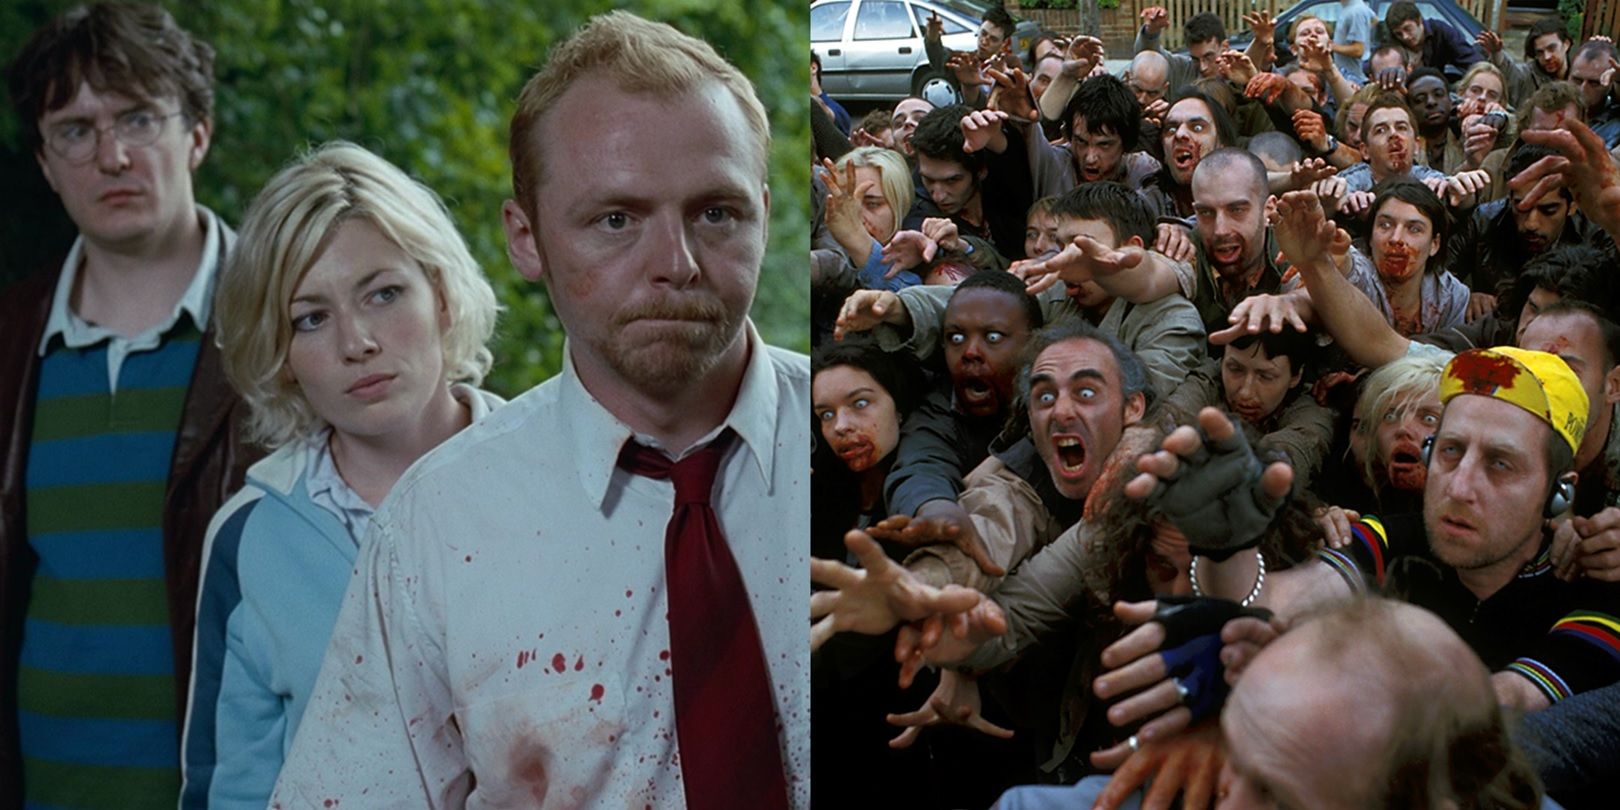 Shaun, Liz, David, and a horde of zombies in Shaun of the Dead